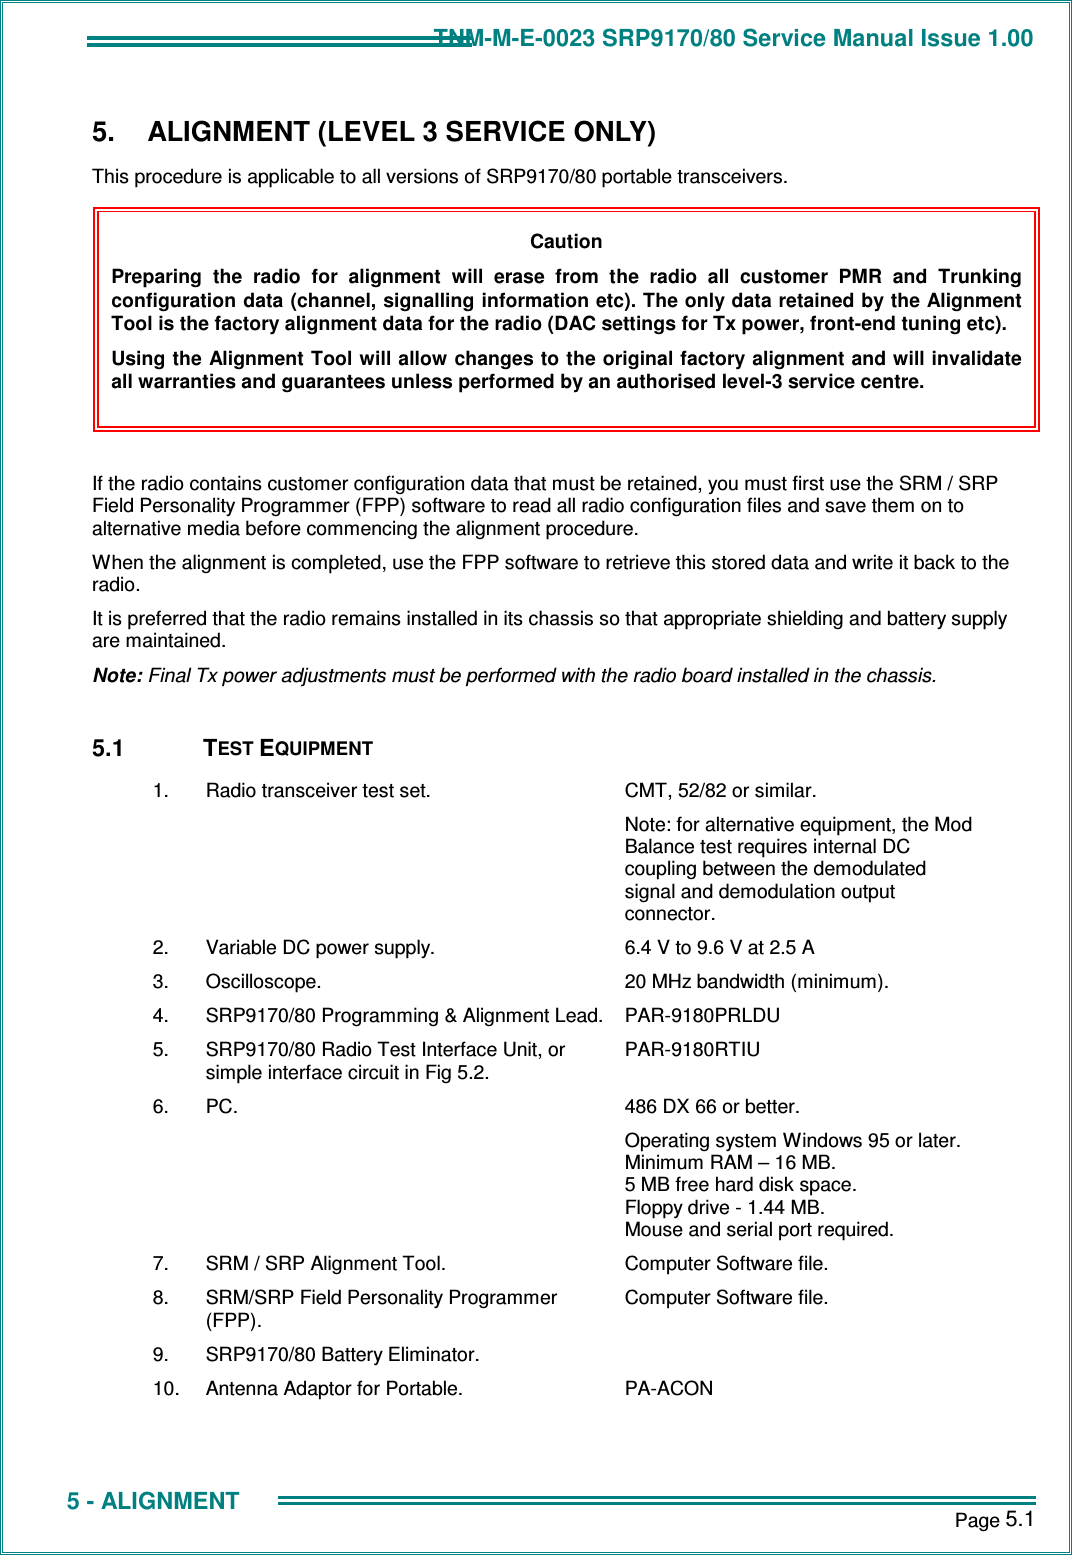 TNM-M-E-0023 SRP9170/80 Service Manual Issue 1.00       Page 5.1  5 - ALIGNMENT 5.  ALIGNMENT (LEVEL 3 SERVICE ONLY) This procedure is applicable to all versions of SRP9170/80 portable transceivers.         If the radio contains customer configuration data that must be retained, you must first use the SRM / SRP Field Personality Programmer (FPP) software to read all radio configuration files and save them on to alternative media before commencing the alignment procedure. When the alignment is completed, use the FPP software to retrieve this stored data and write it back to the radio. It is preferred that the radio remains installed in its chassis so that appropriate shielding and battery supply are maintained. Note: Final Tx power adjustments must be performed with the radio board installed in the chassis.  5.1  TEST EQUIPMENT 1.  Radio transceiver test set.  CMT, 52/82 or similar. Note: for alternative equipment, the Mod Balance test requires internal DC coupling between the demodulated signal and demodulation output connector. 2.  Variable DC power supply.  6.4 V to 9.6 V at 2.5 A 3.  Oscilloscope.  20 MHz bandwidth (minimum). 4.  SRP9170/80 Programming &amp; Alignment Lead. PAR-9180PRLDU 5.  SRP9170/80 Radio Test Interface Unit, or simple interface circuit in Fig 5.2. PAR-9180RTIU 6.  PC.  486 DX 66 or better. Operating system Windows 95 or later. Minimum RAM – 16 MB. 5 MB free hard disk space. Floppy drive - 1.44 MB. Mouse and serial port required. 7.  SRM / SRP Alignment Tool.  Computer Software file. 8.  SRM/SRP Field Personality Programmer (FPP). Computer Software file. 9.  SRP9170/80 Battery Eliminator.   10.  Antenna Adaptor for Portable.  PA-ACON  Caution Preparing  the  radio  for  alignment  will  erase  from  the  radio  all  customer  PMR  and  Trunking configuration data (channel, signalling information etc). The only data retained by the Alignment Tool is the factory alignment data for the radio (DAC settings for Tx power, front-end tuning etc). Using the Alignment Tool will allow changes to the original factory alignment and will invalidate all warranties and guarantees unless performed by an authorised level-3 service centre. 